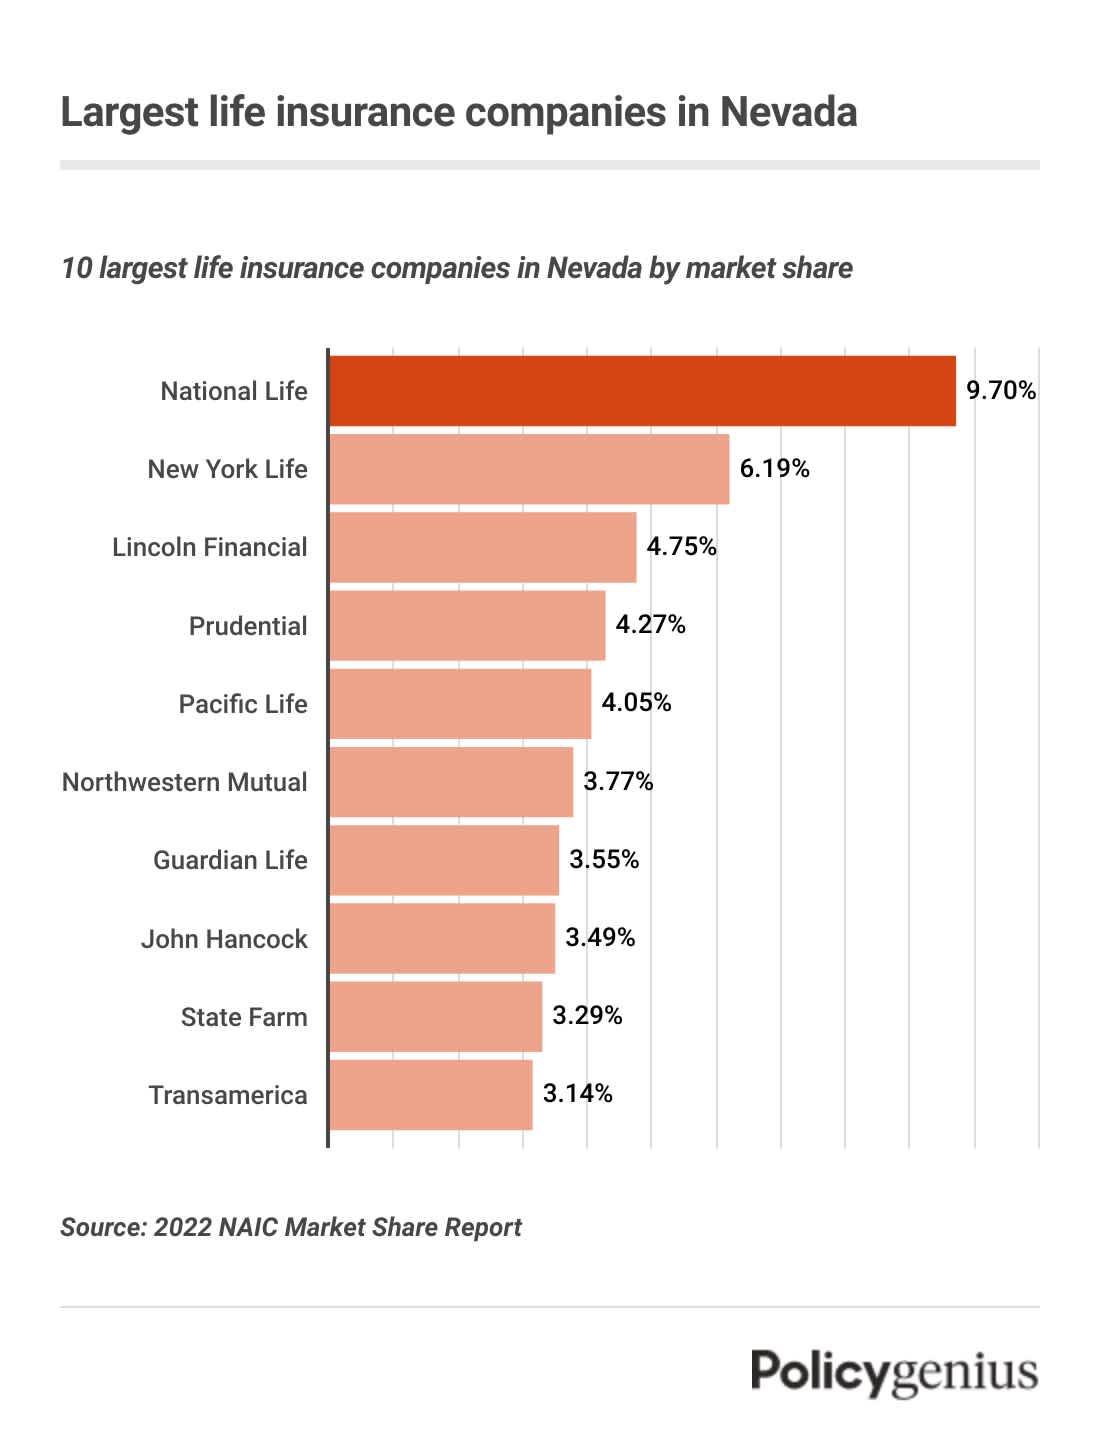 A bar graph showing the largest life insurance companies in Nevada by market share. National Life is the largest company.